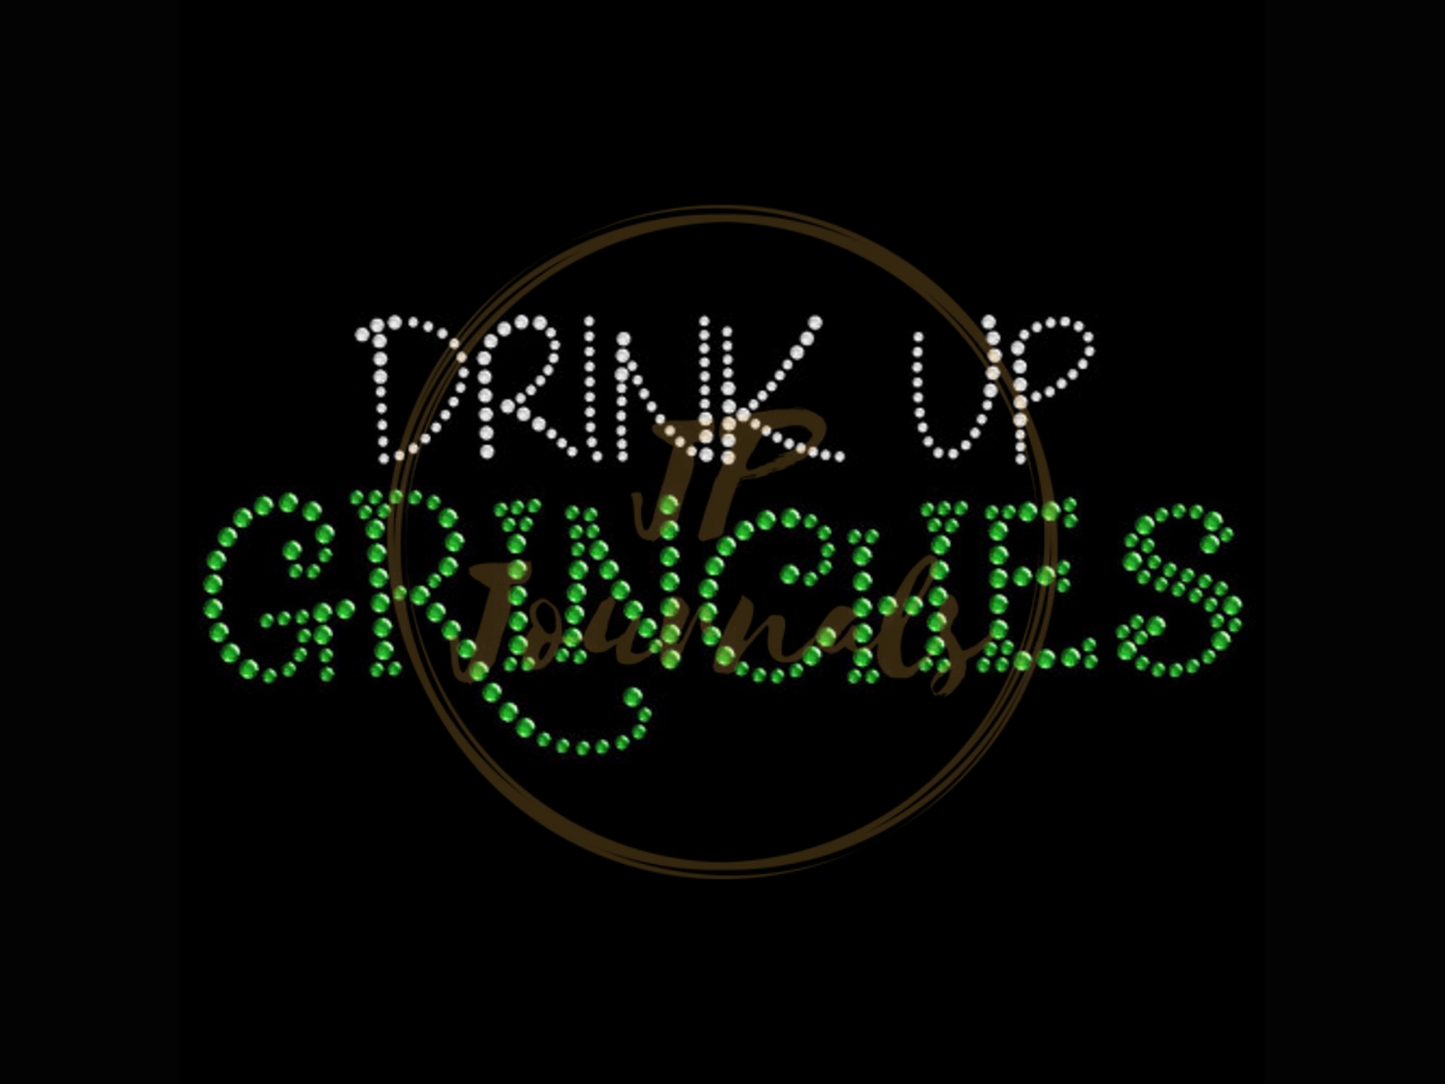 Drink Up Grinches Christmas Holiday Bling Tee